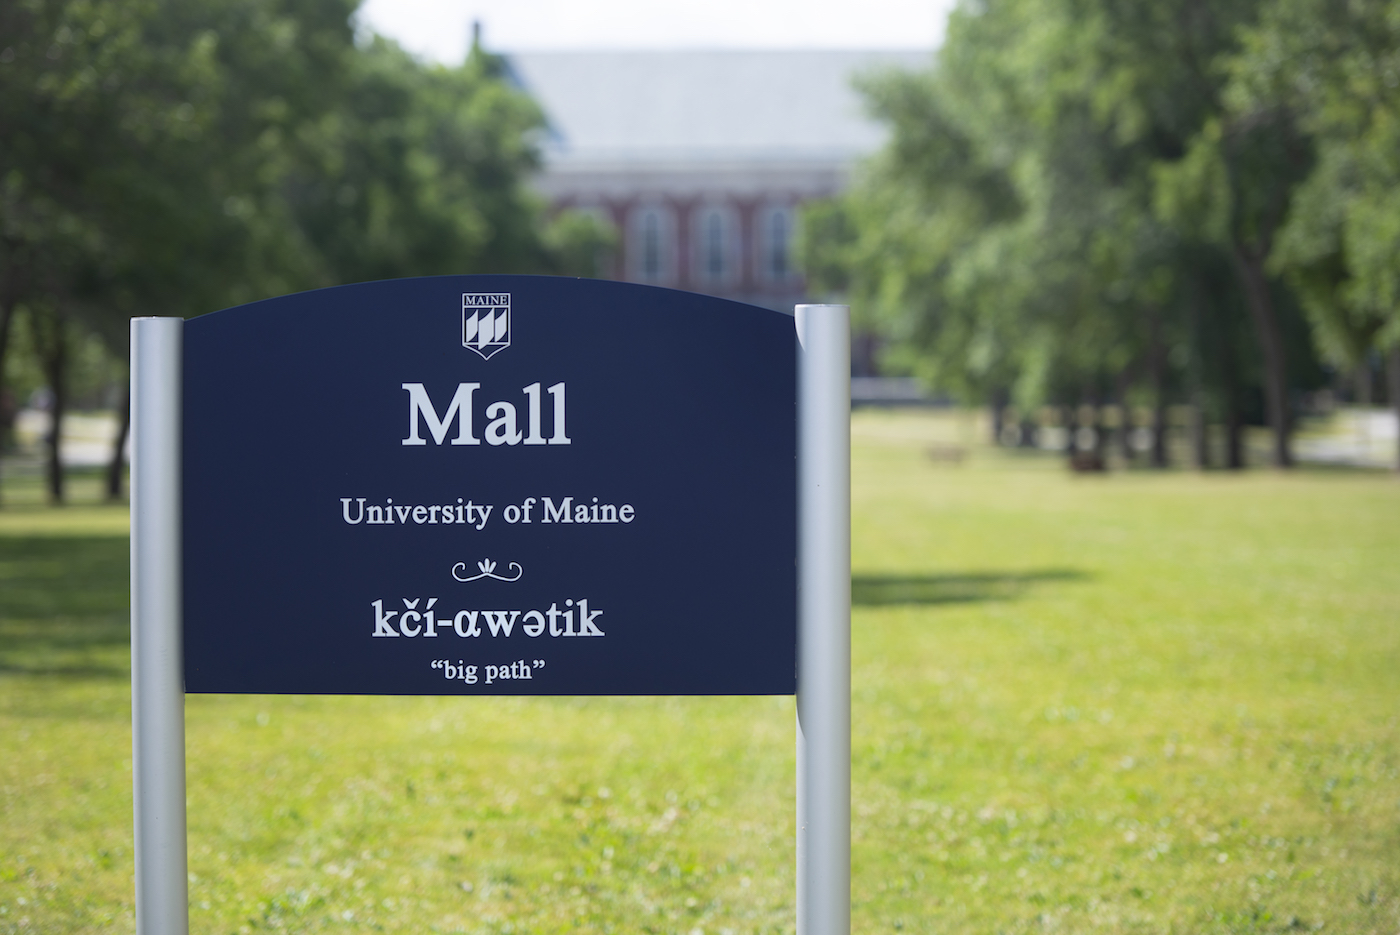 A photo of the sign in the mall at the University of Maine